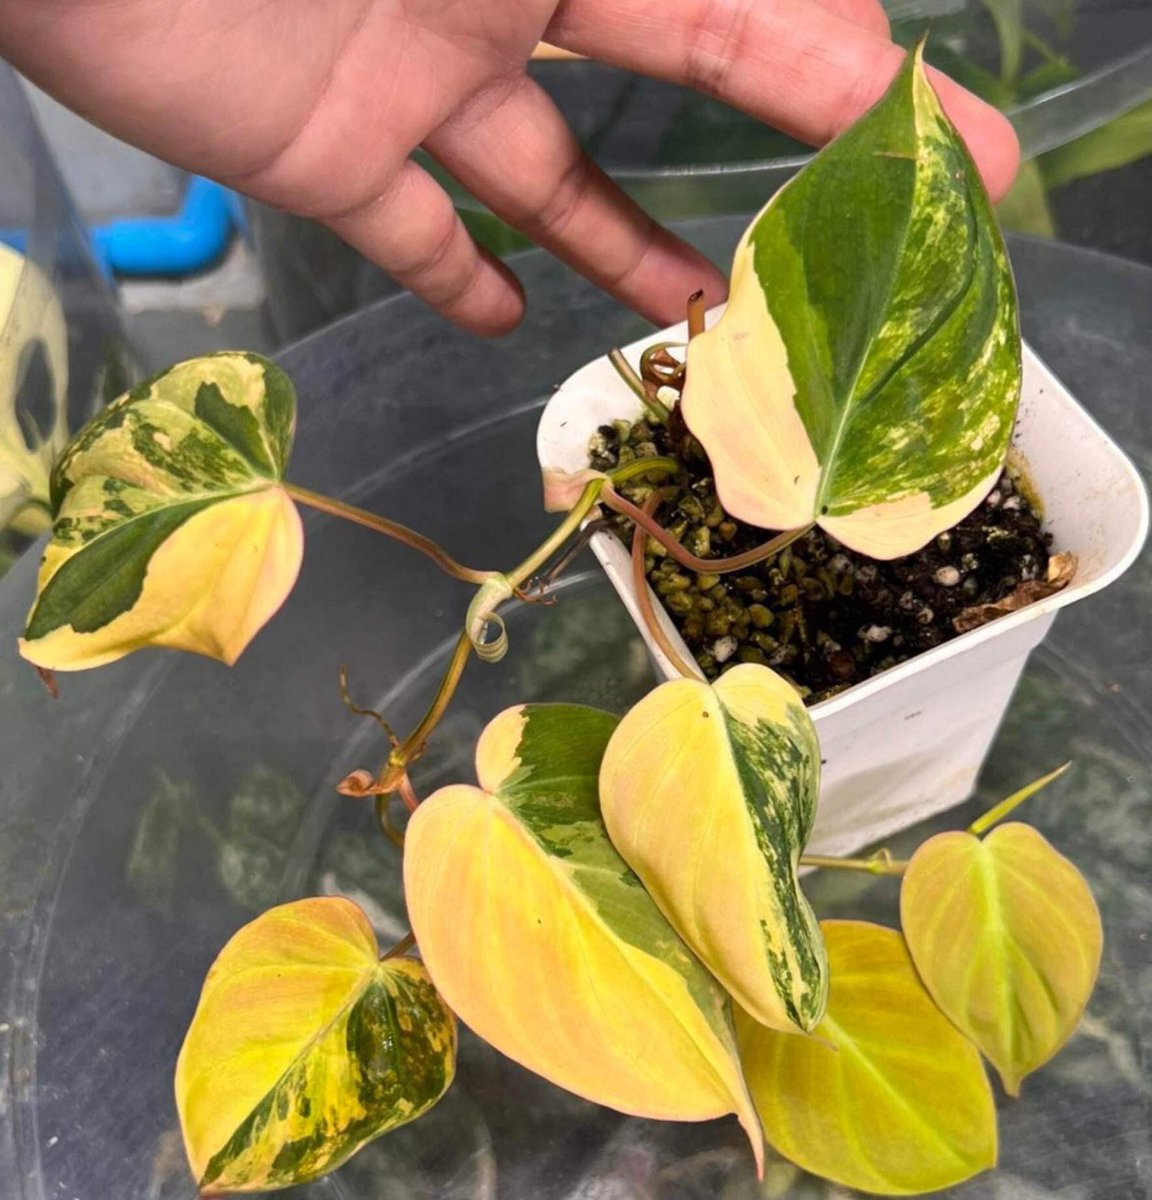 🌱philodendron mican variegated

Tonmong Tonmai 🪴 Rare plants, variegated plants shop 🇹🇭
✈️ Worldwide shipping
 Please  linktr.ee/tonmongtonmai 

#mican #plants #planttwitter  #rareplants  
#indoorplants #houseplantlover  #plantgarden #gardening #aroid #philodendron #variegated